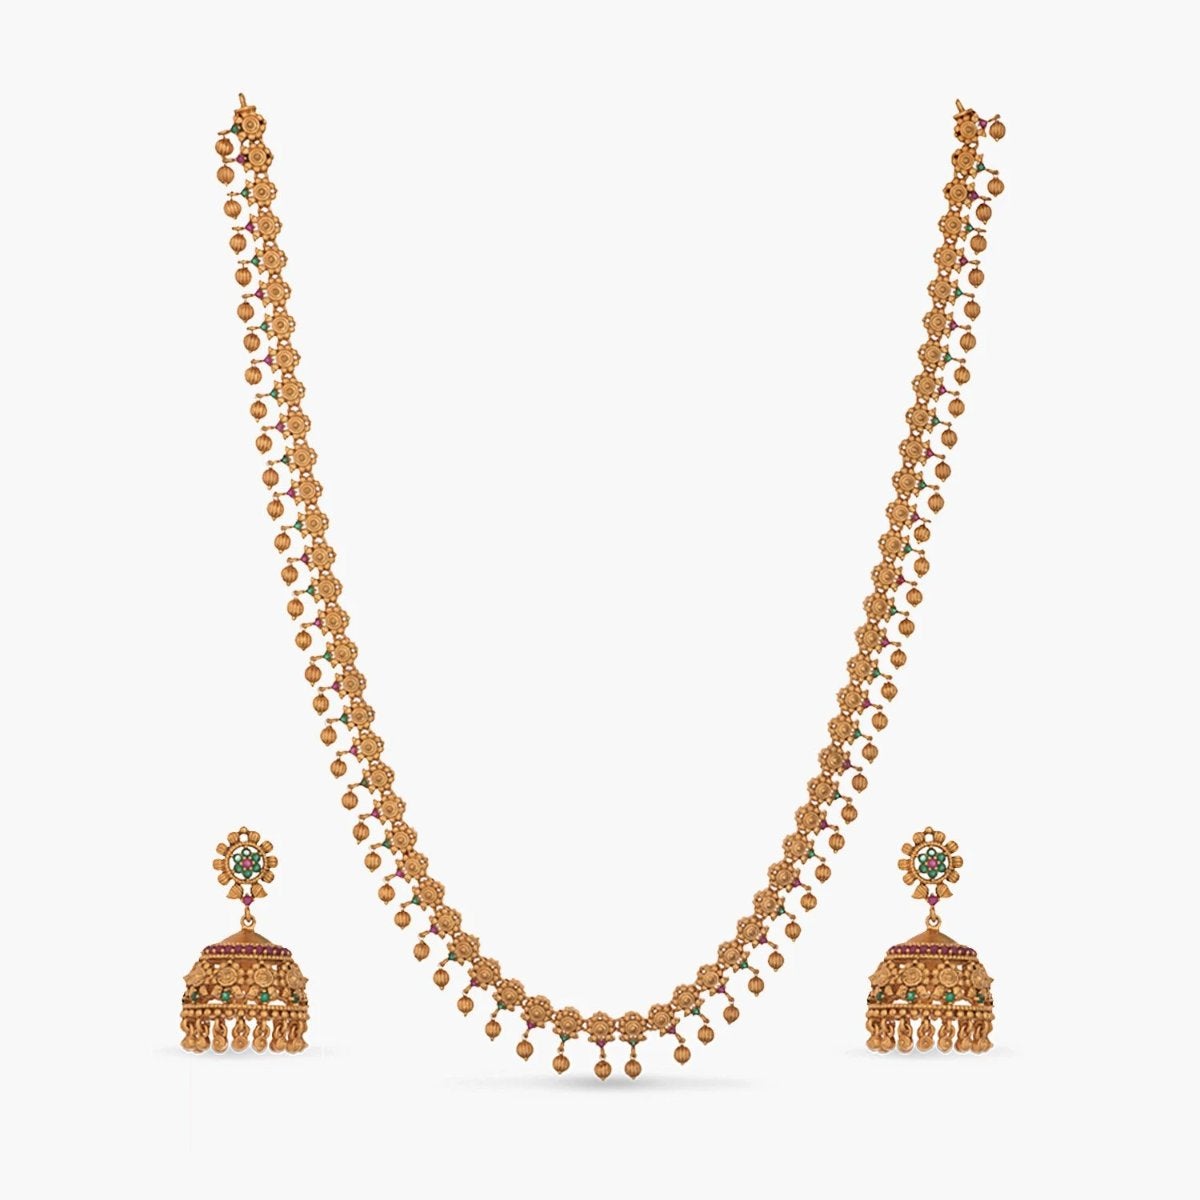 A picture of an Indian artificial jewelry set: an antique gold-colored necklace and matching earrings with intricate designs.